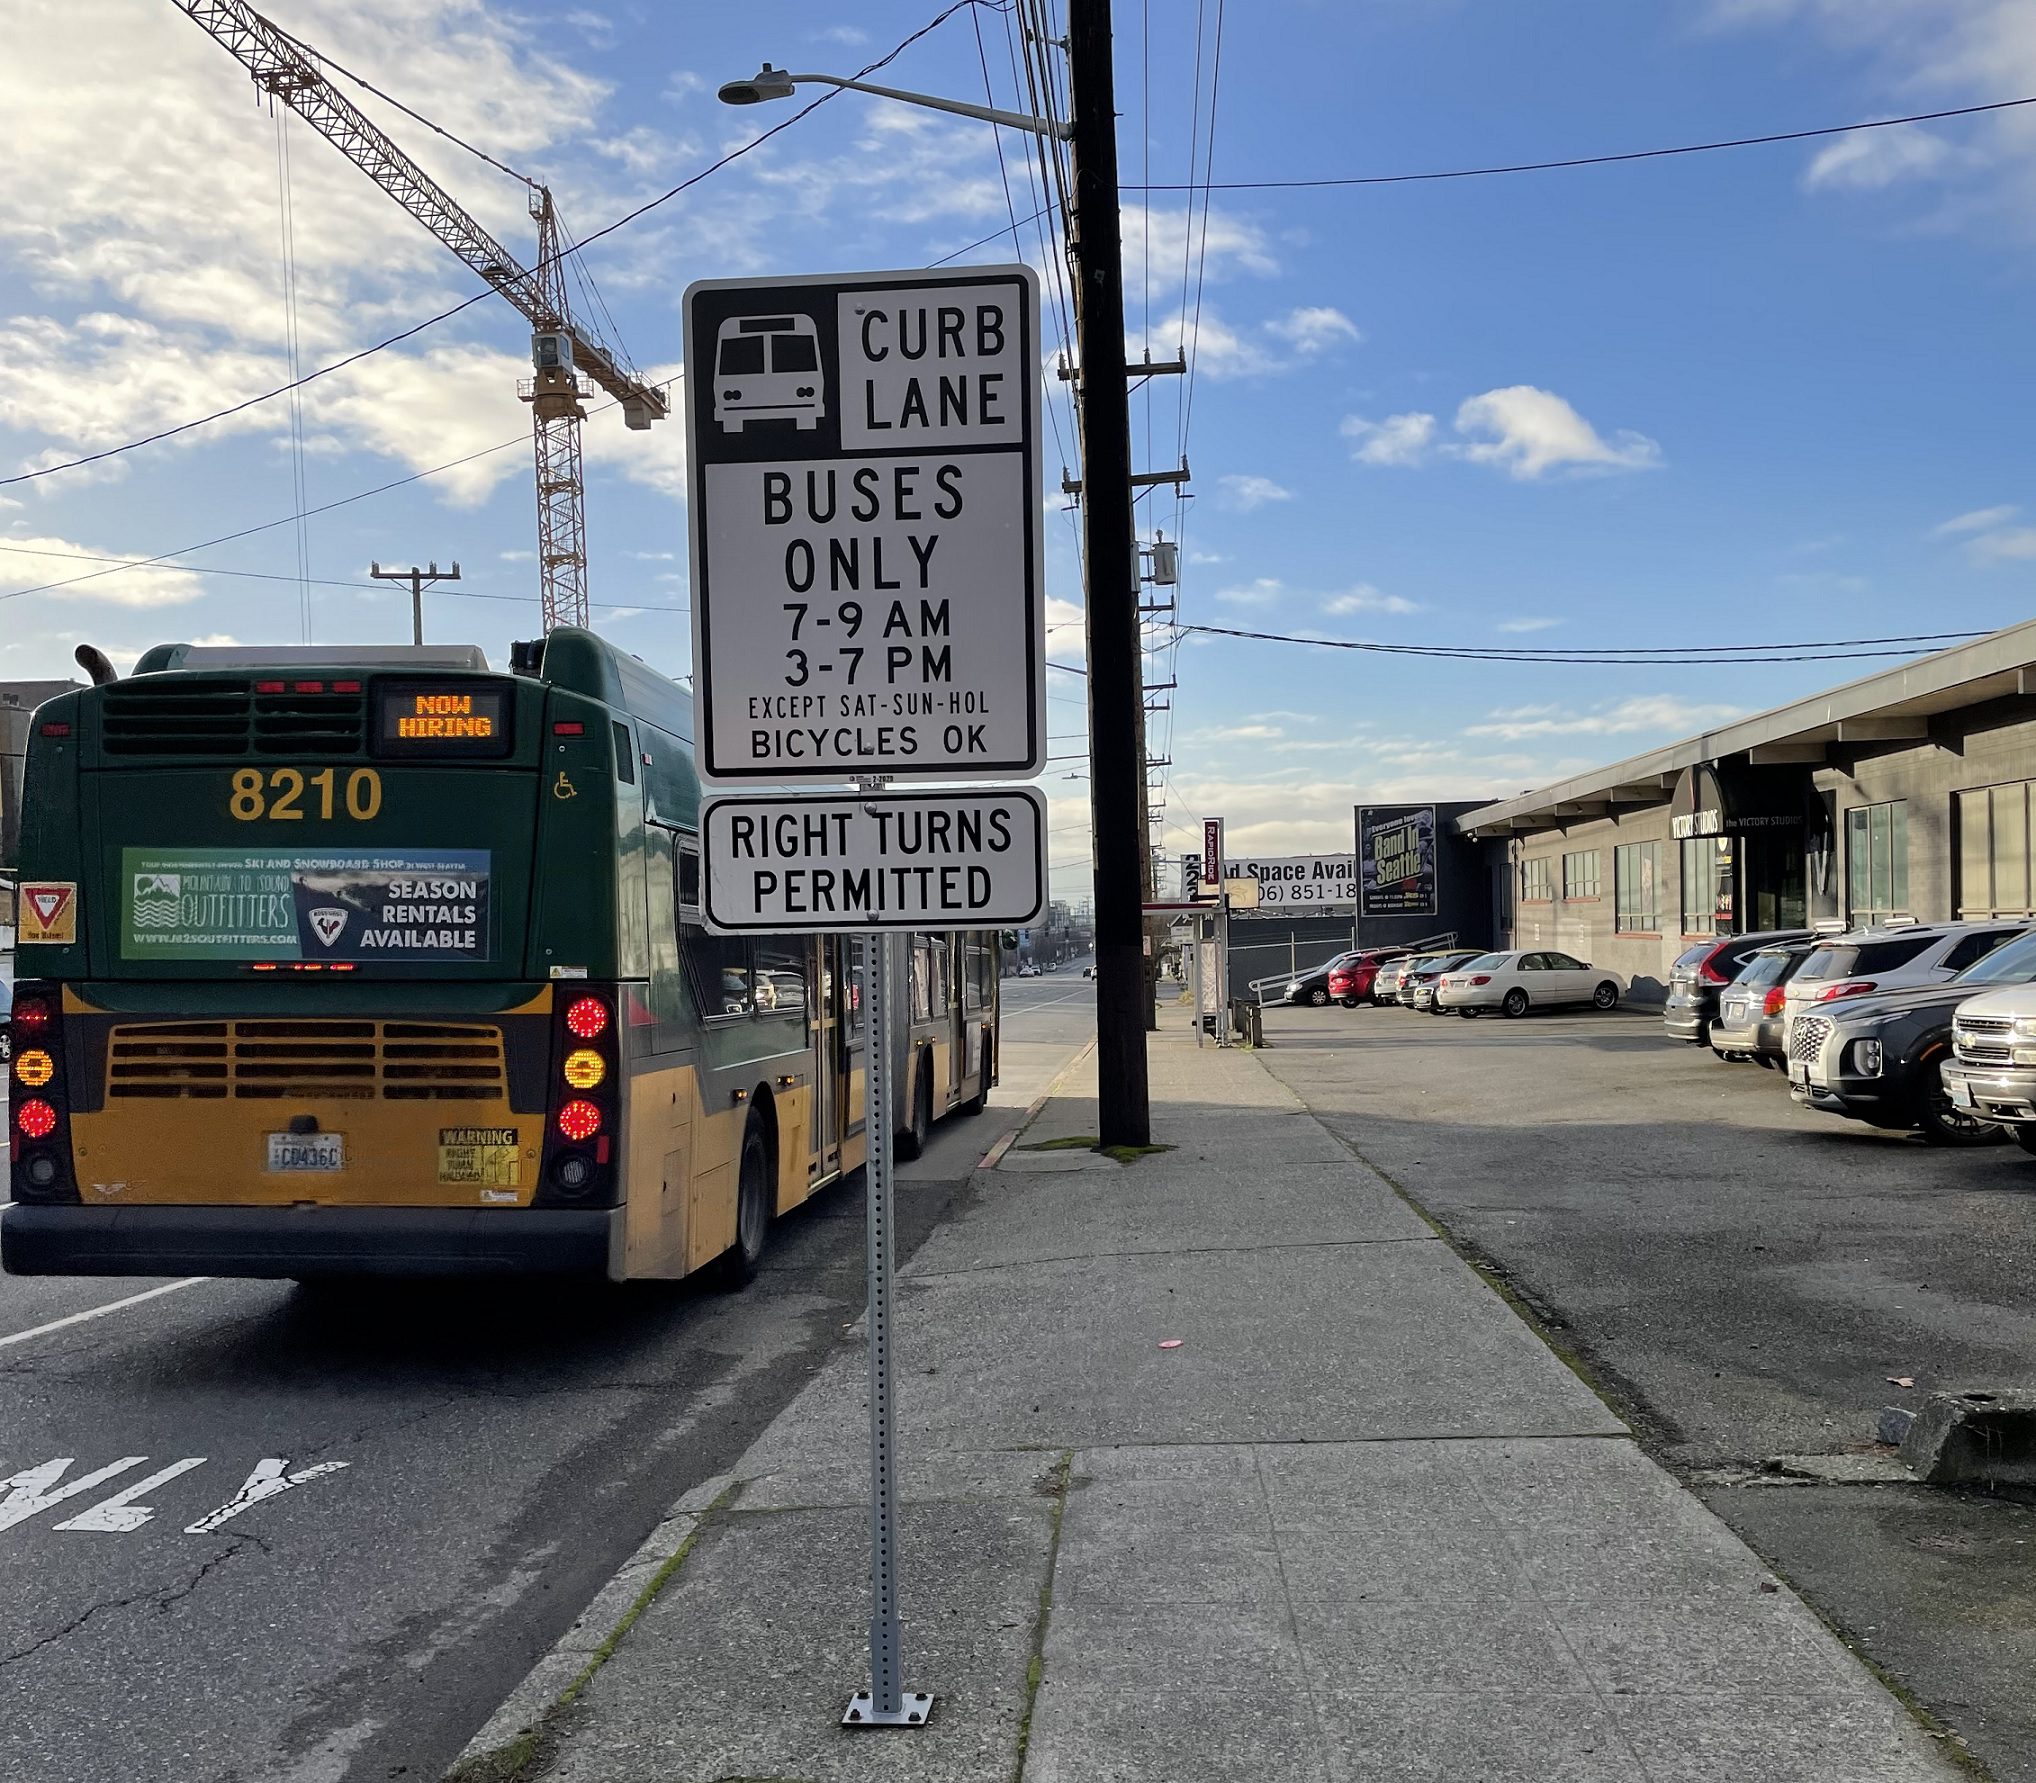 A bus travels away from the camera on a sunny day. A white sign notes curb lane, buses only, from 7-9AM and 3-7PM on weekdays. Sidewalk and buildings and parked cars are in the background.